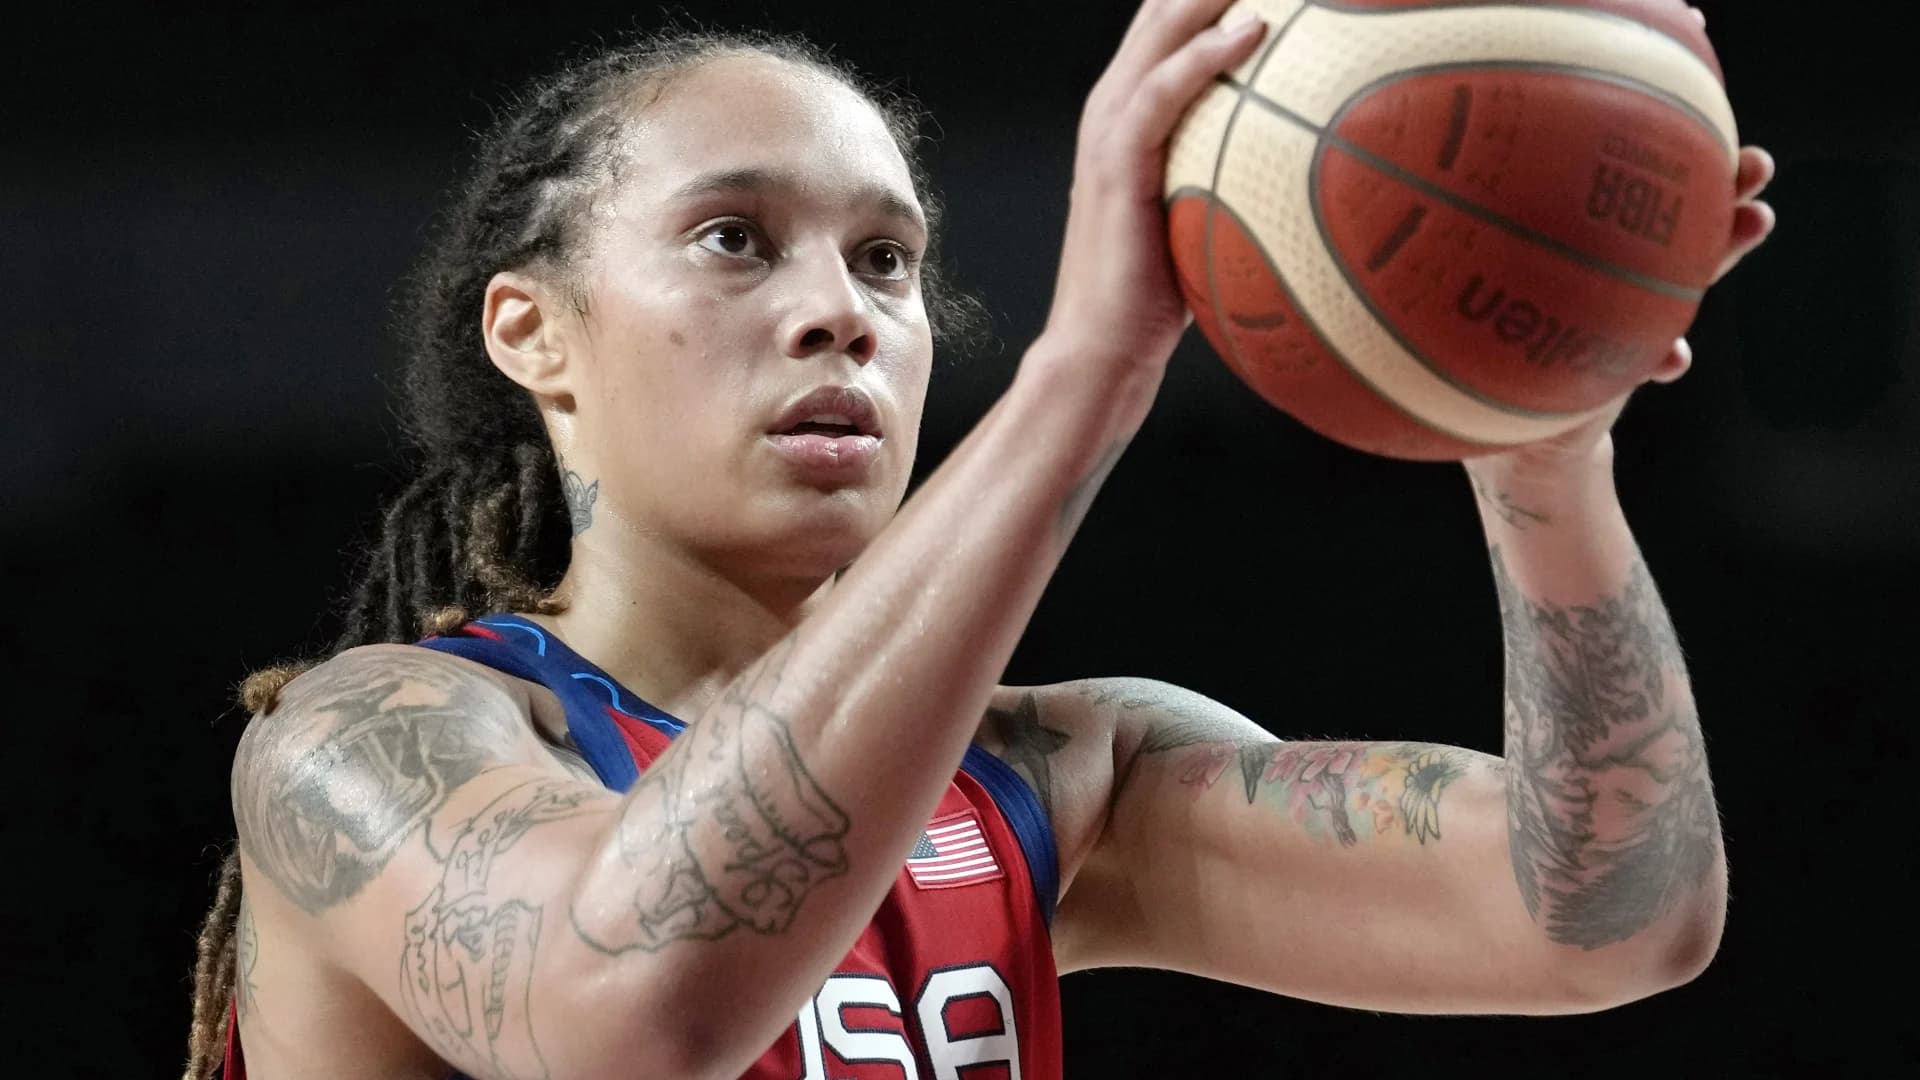 US demands Russia allow access to detained Brittney Griner